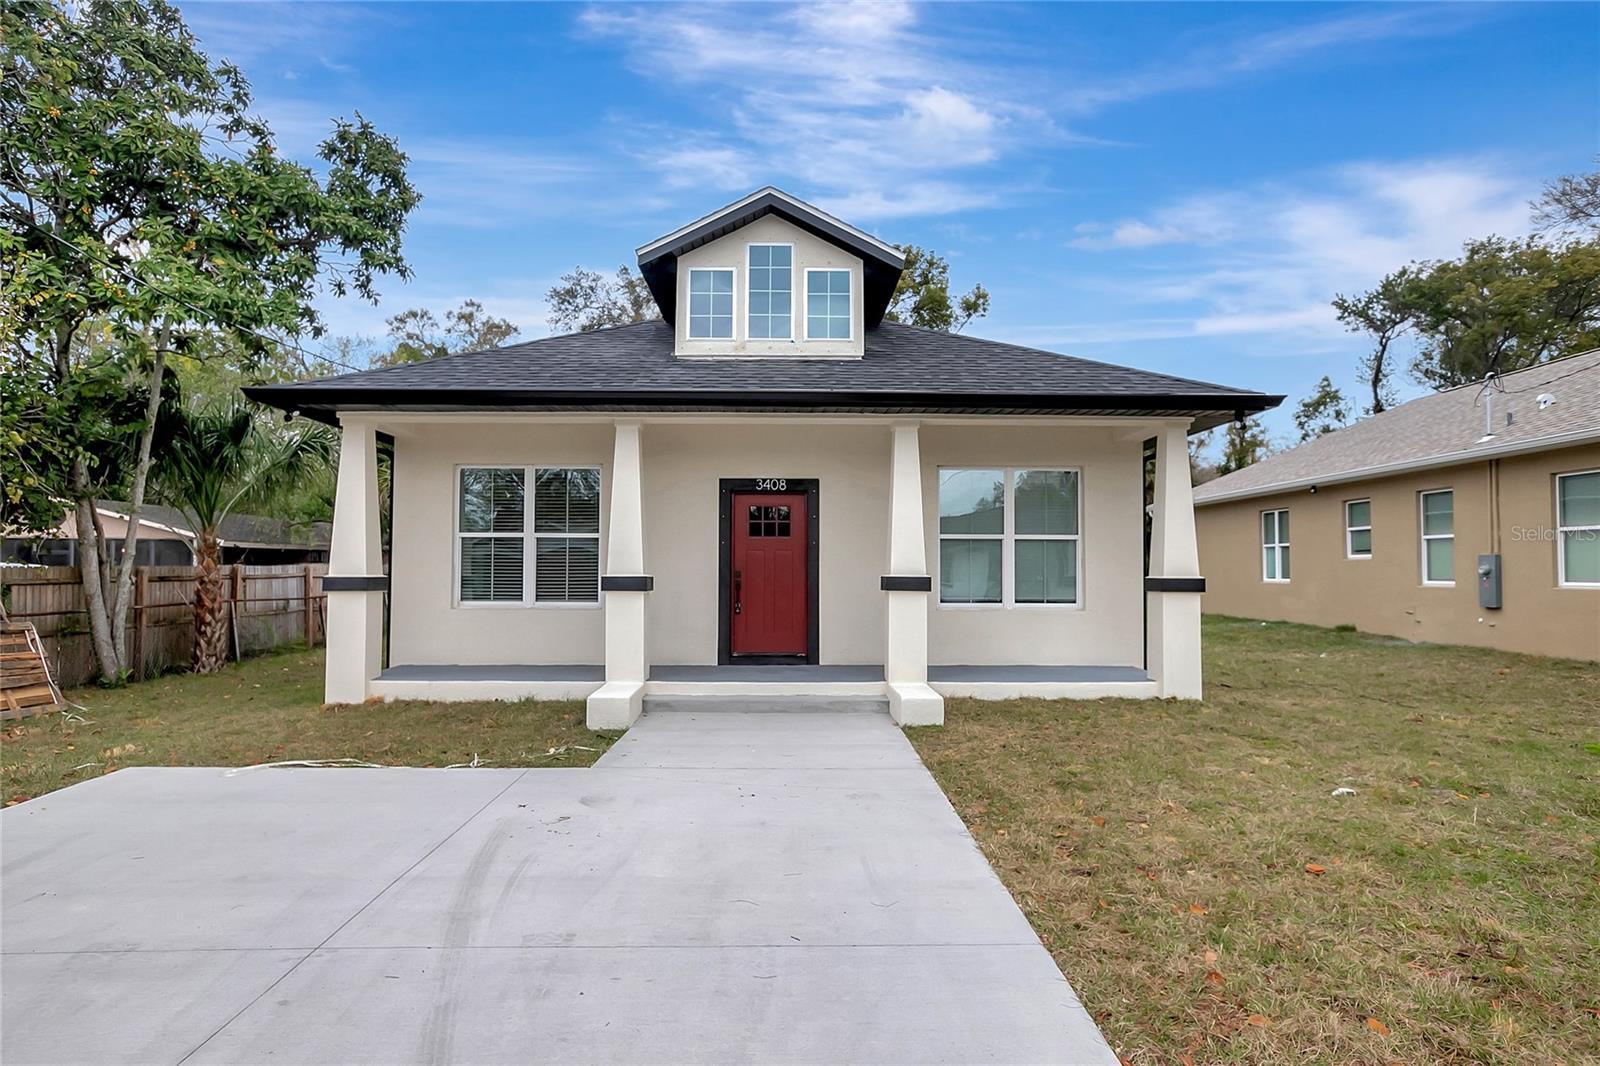 Photo one of 3408 E Henry Ave Tampa FL 33610 | MLS T3505561